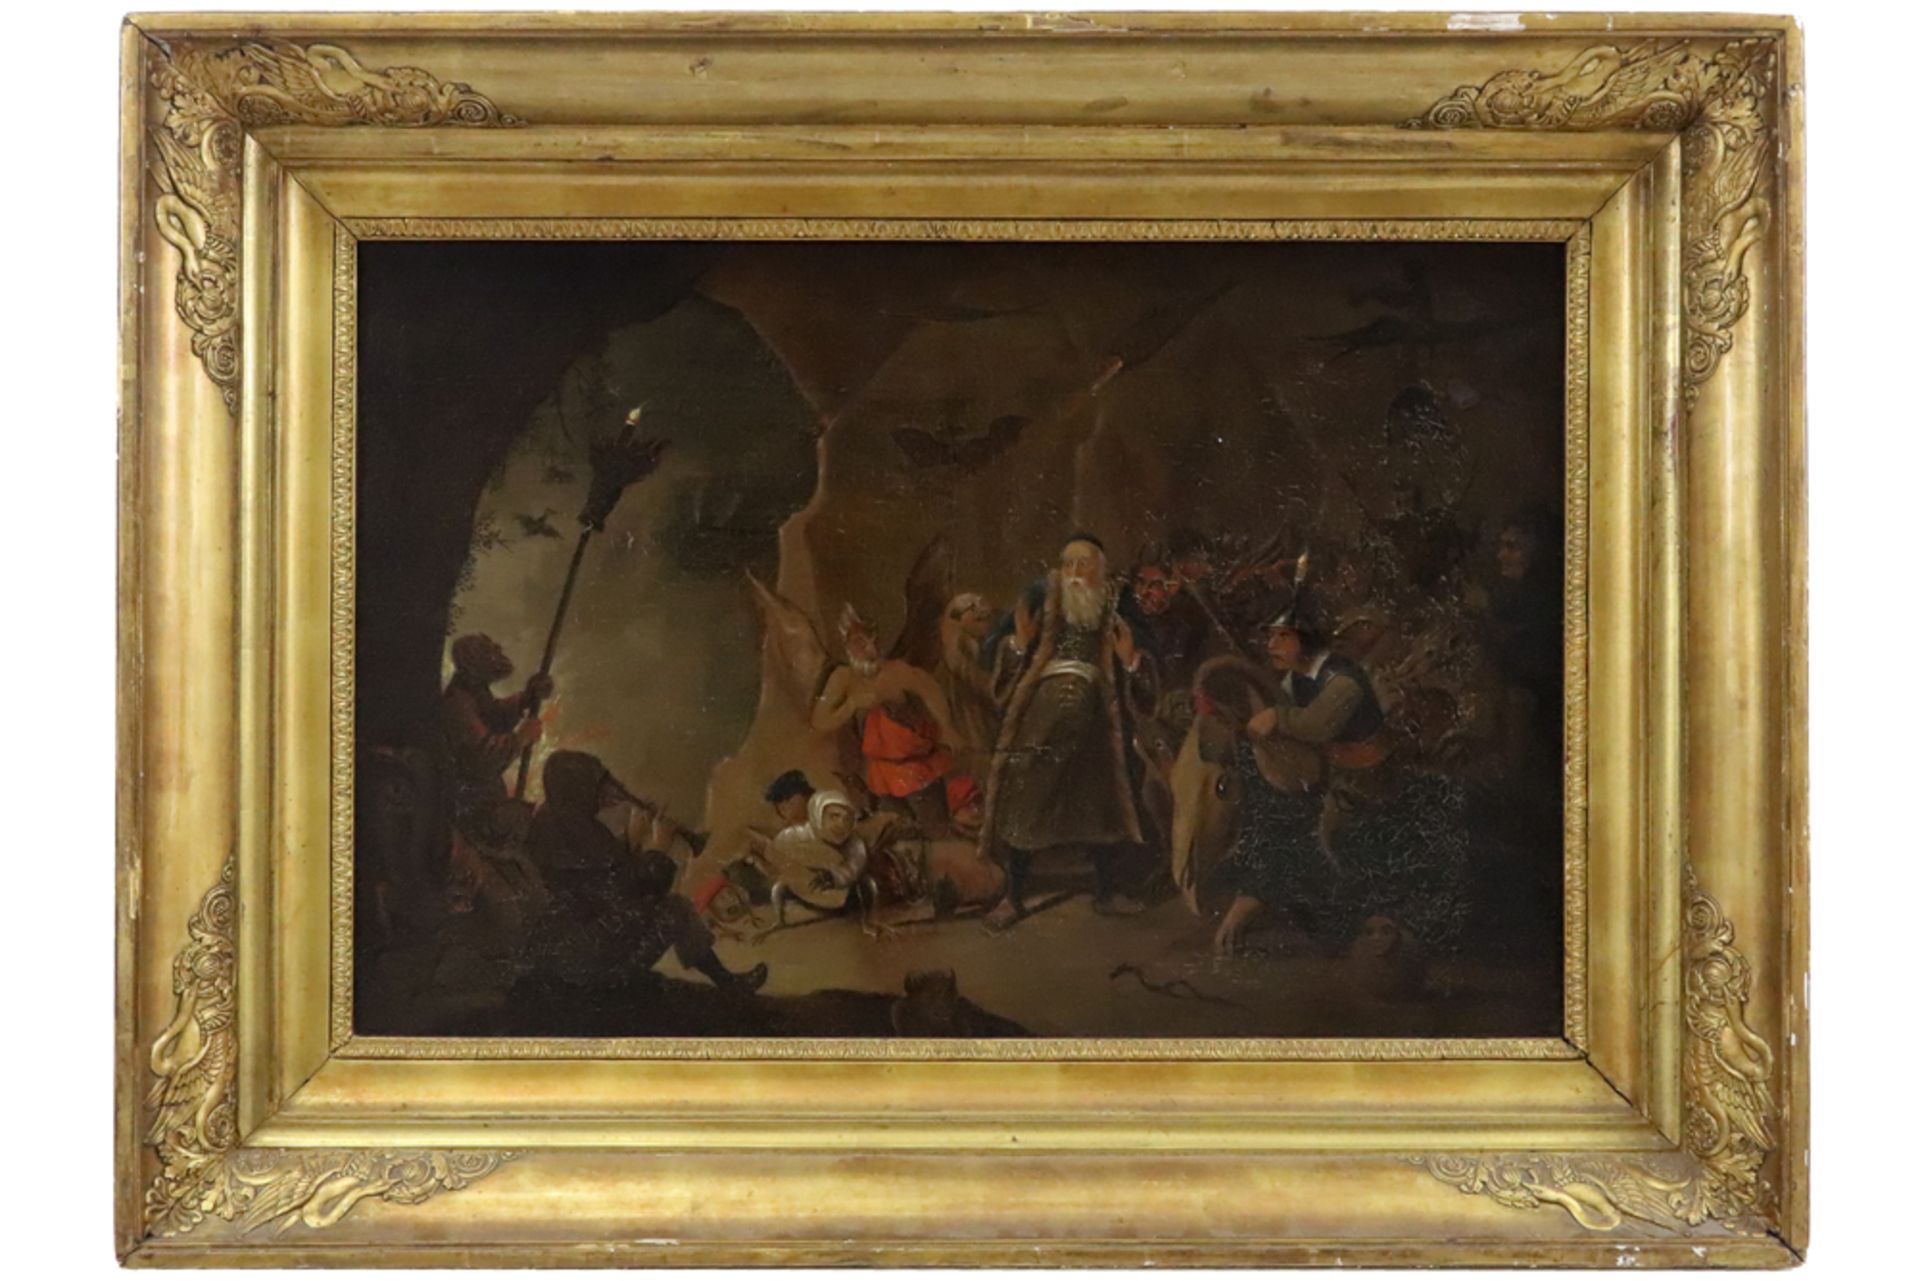 17th Cent. oil on canvas with a typical Jeroen Bosch style theme - attributed to David II Teniers - Image 2 of 3